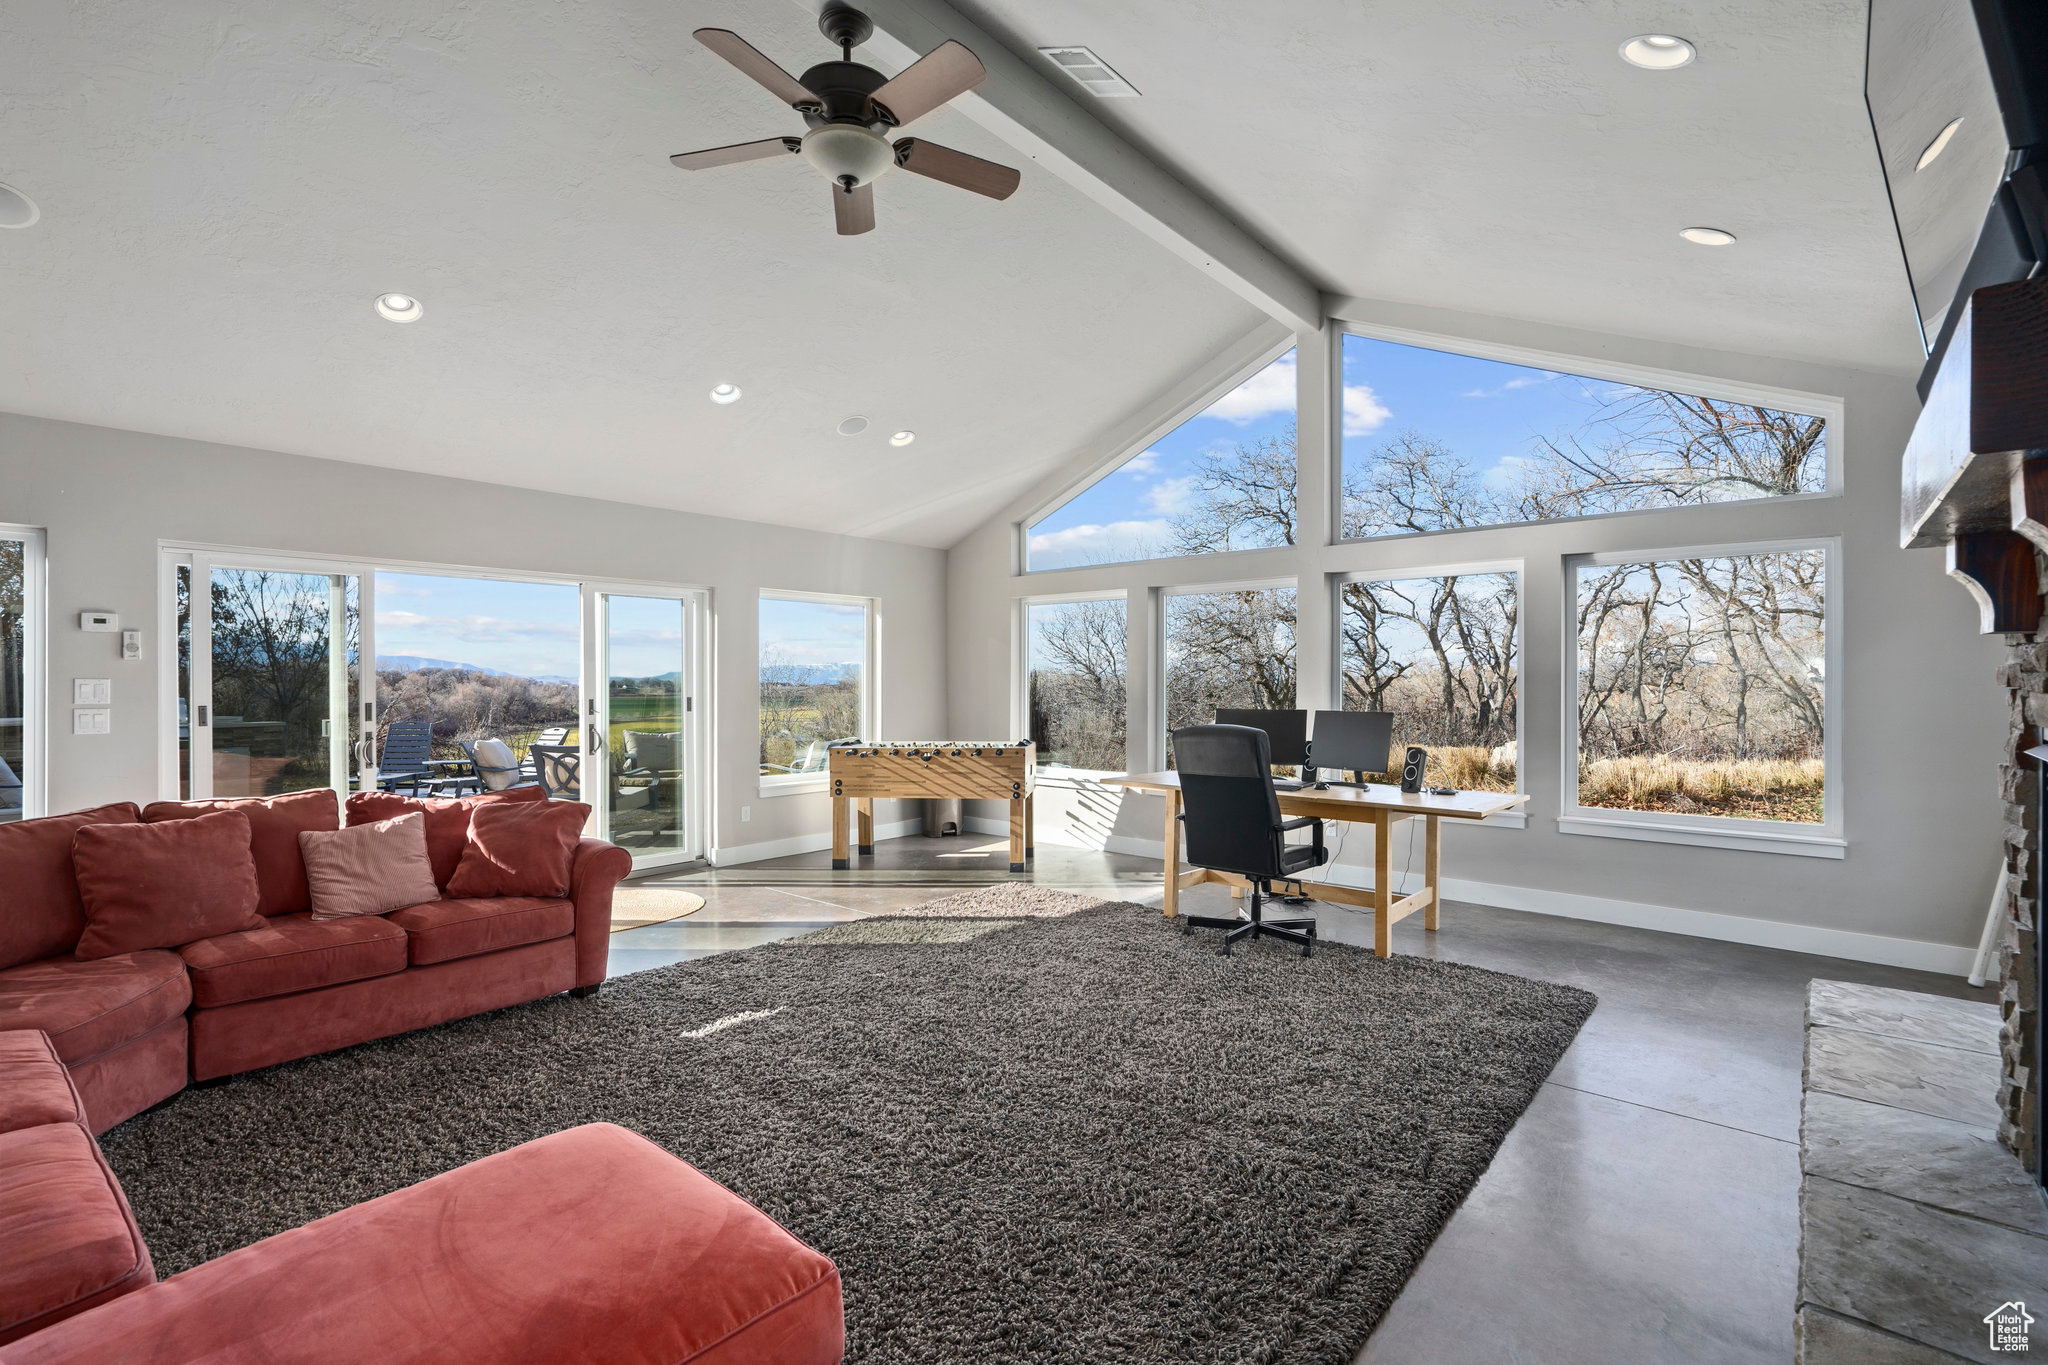 Enjoy close to 600 square feet of entertaining or gathering space in this cozy sunroom behind the garage on the north side of the home.